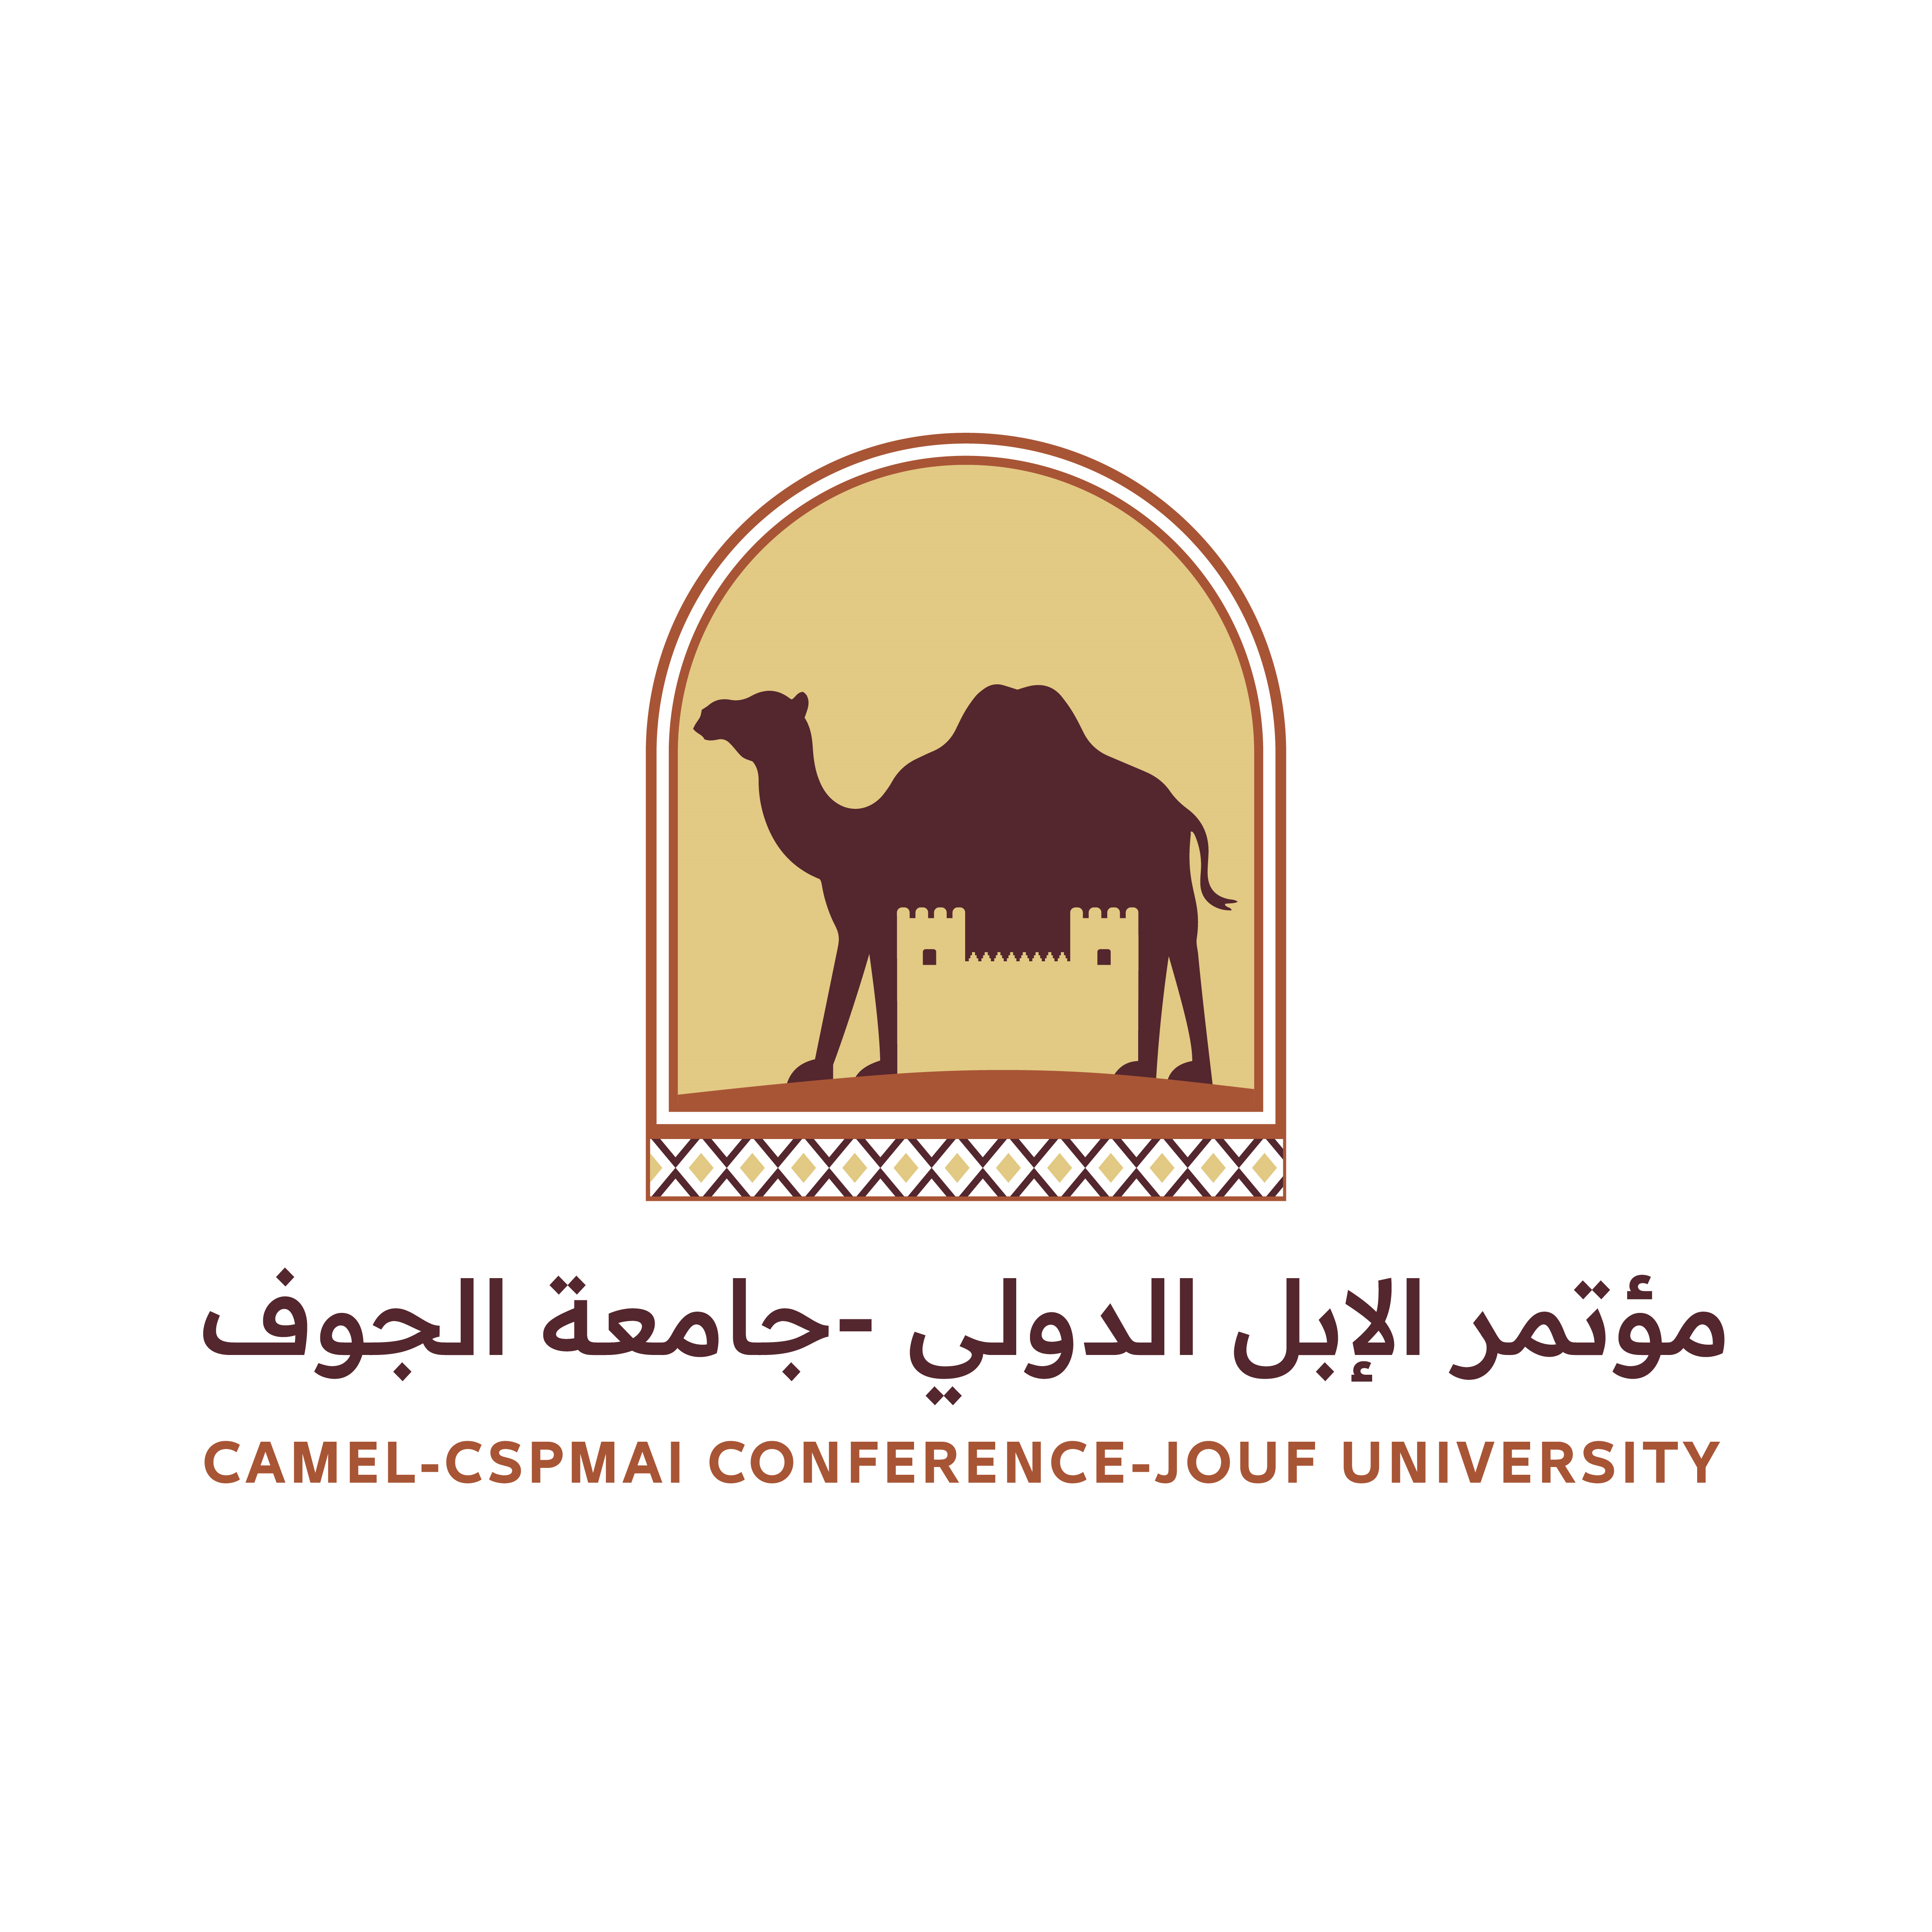 Initiatives launched within the activities accompanying the International Camel Conference at the College of Science, Jouf University